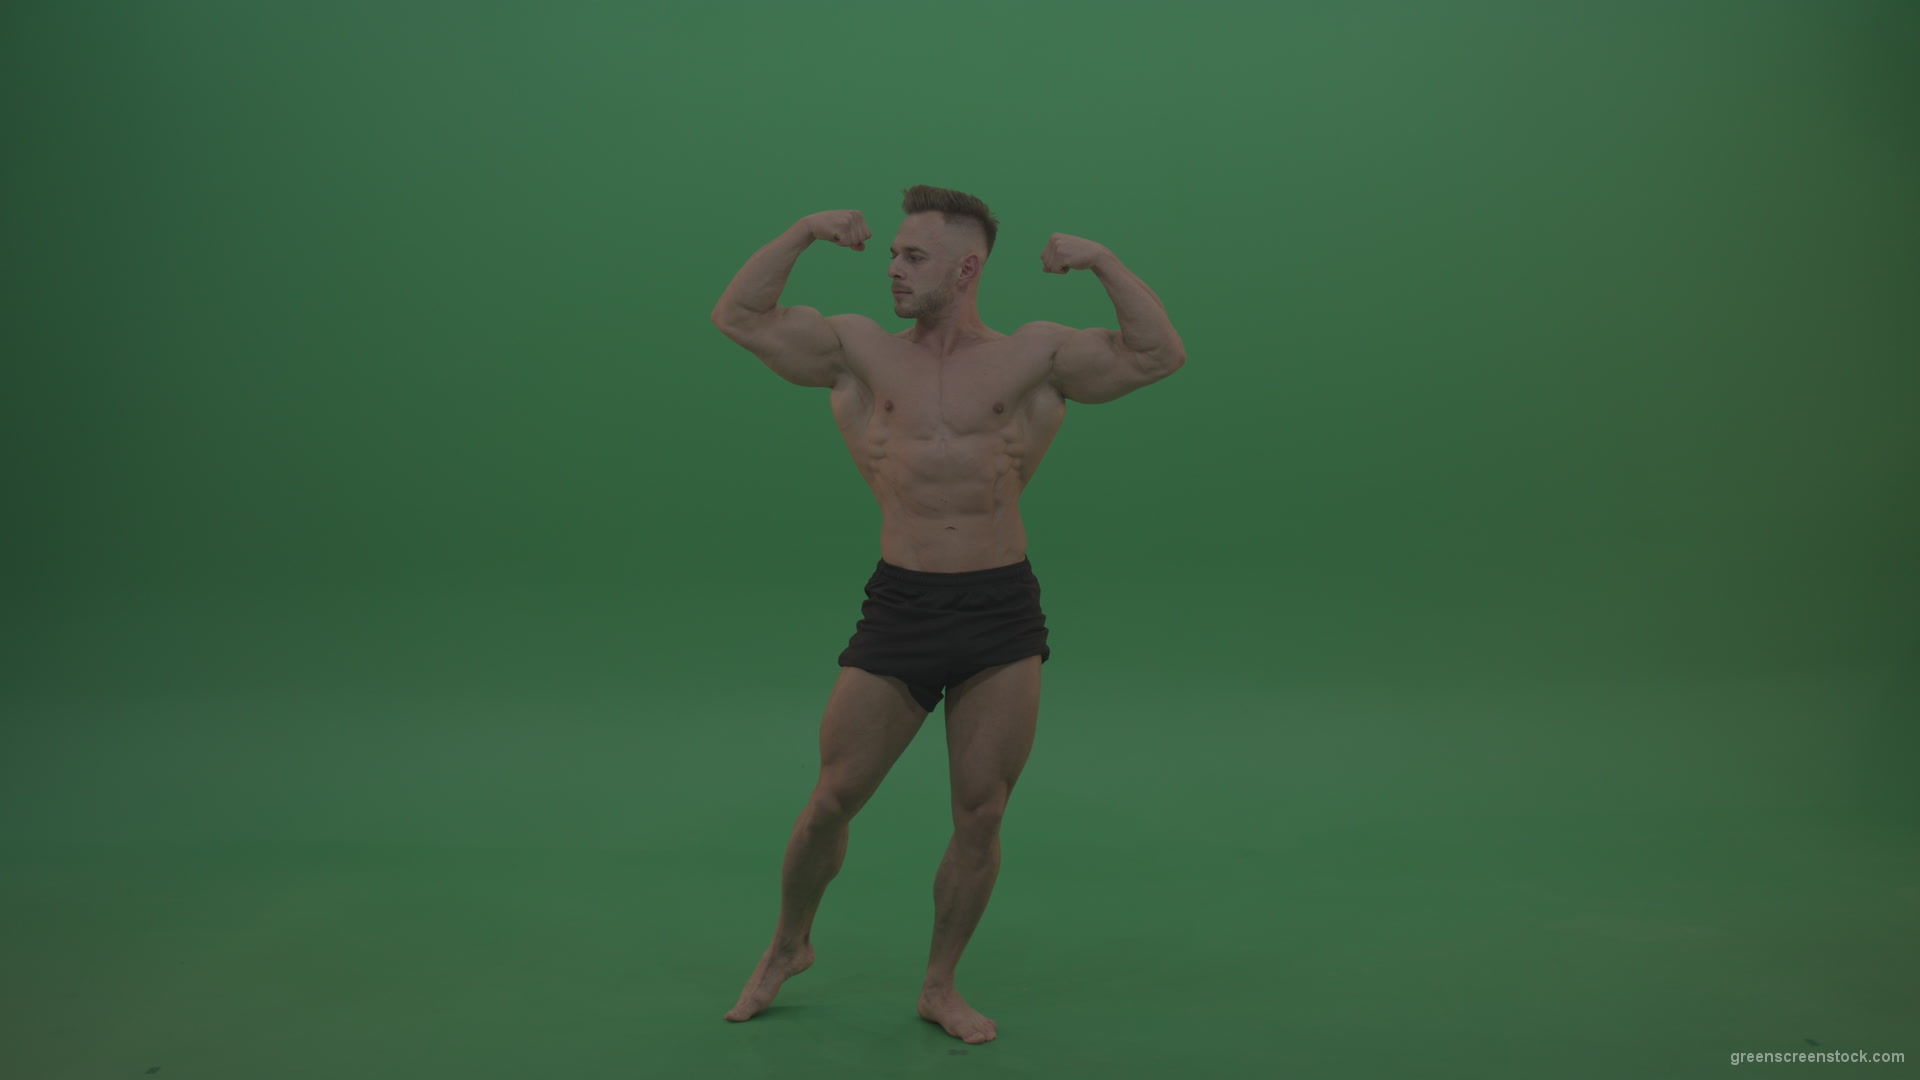 Young_Sportsman_Showing_Front_Double_Biceps_And_Thigh_Muscles_Bodybuilding_Positions_On_Gren_Screen_Wall_Background_004 Green Screen Stock